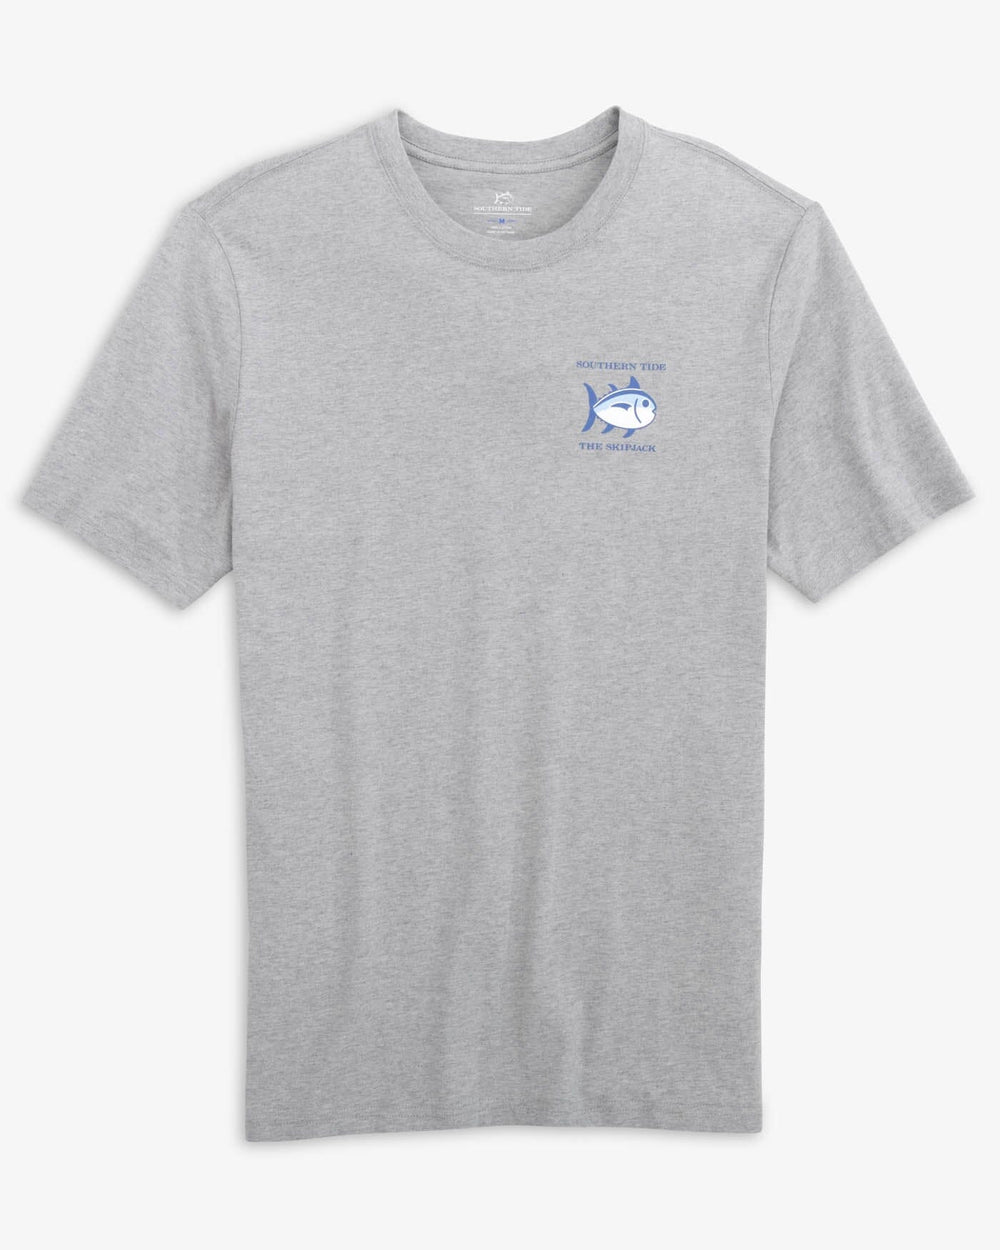 The front view of the Southern Tide Heathered Original Skipjack T-Shirt by Southern Tide - Heather Quarry